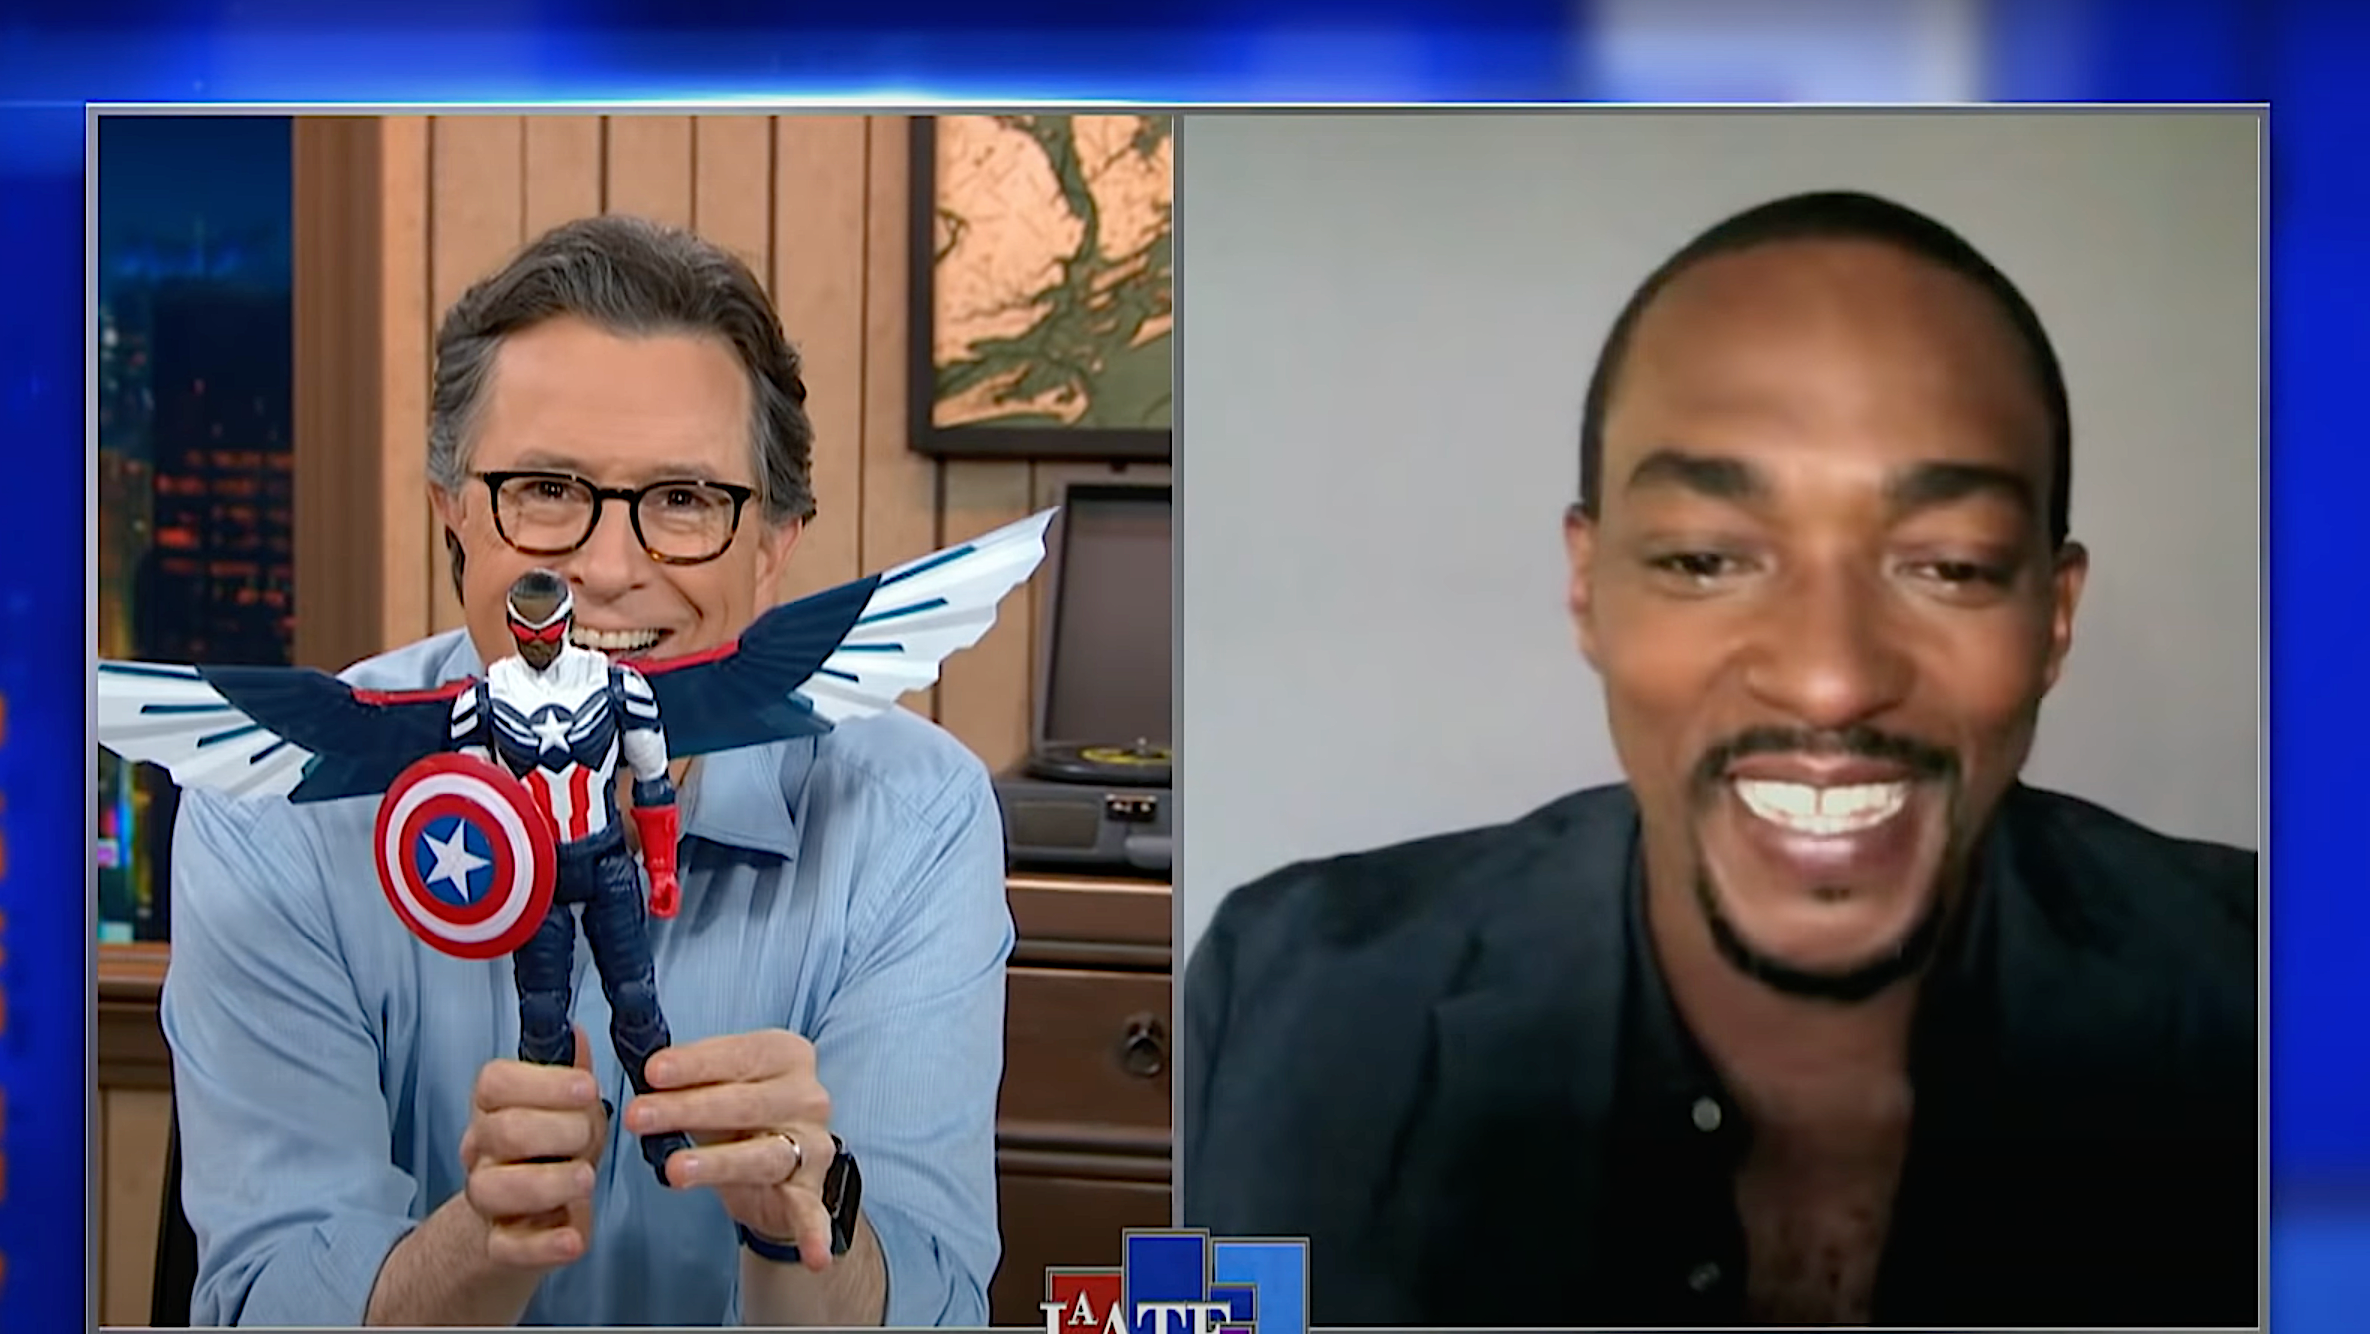 Stephen Colbert shows off his pre-release Captain America doll to an envious Anthony Mackie